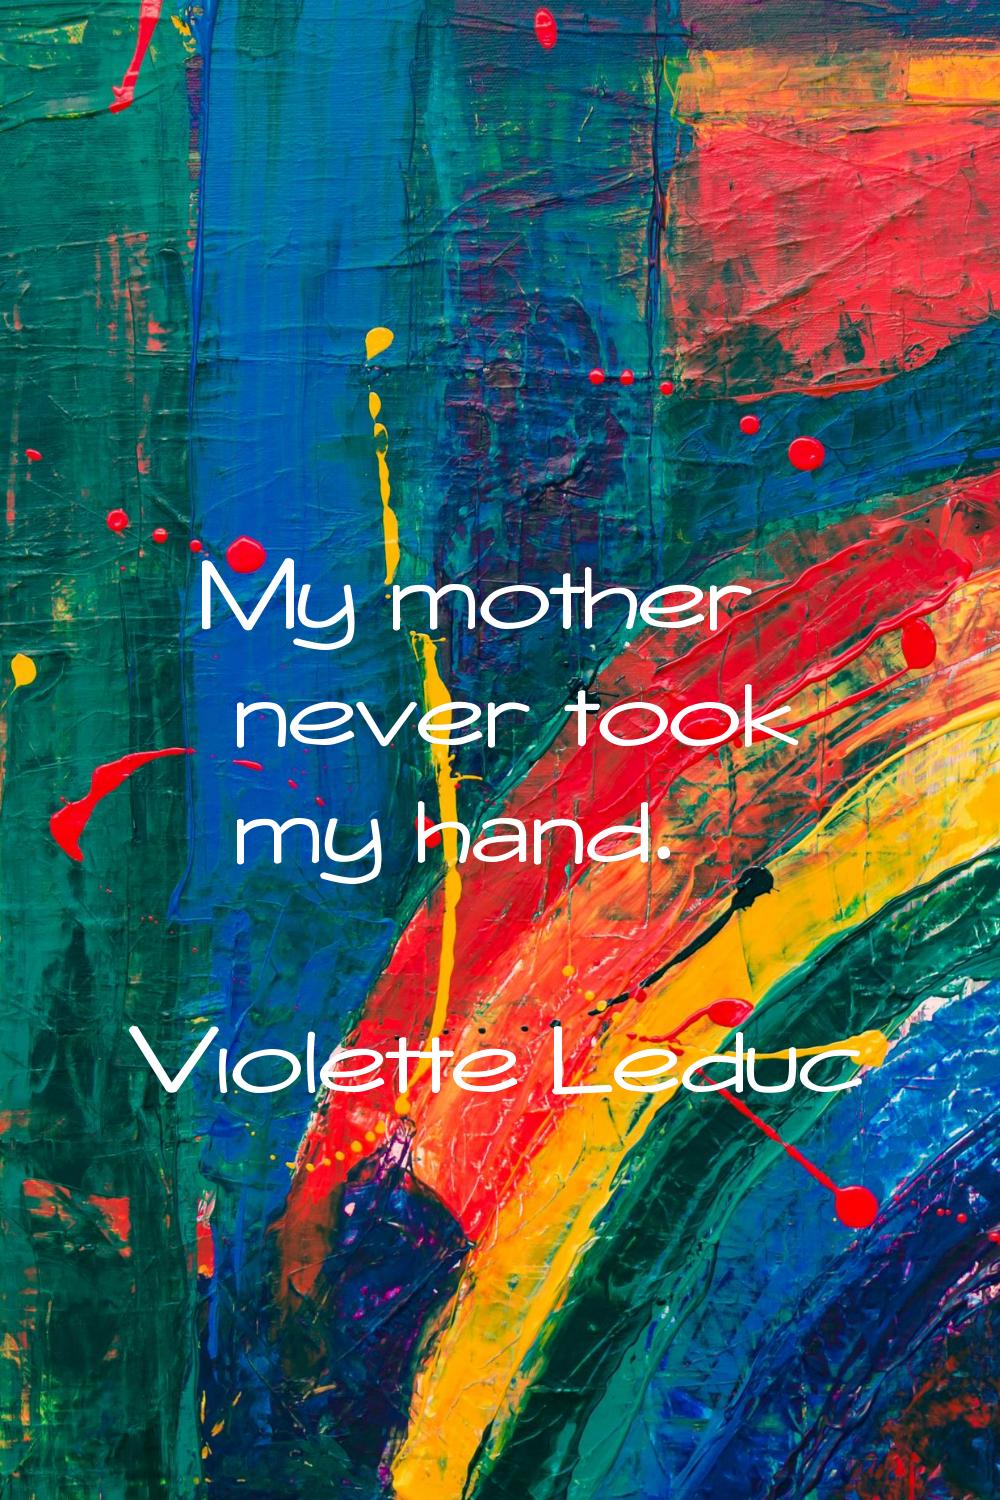 My mother never took my hand.